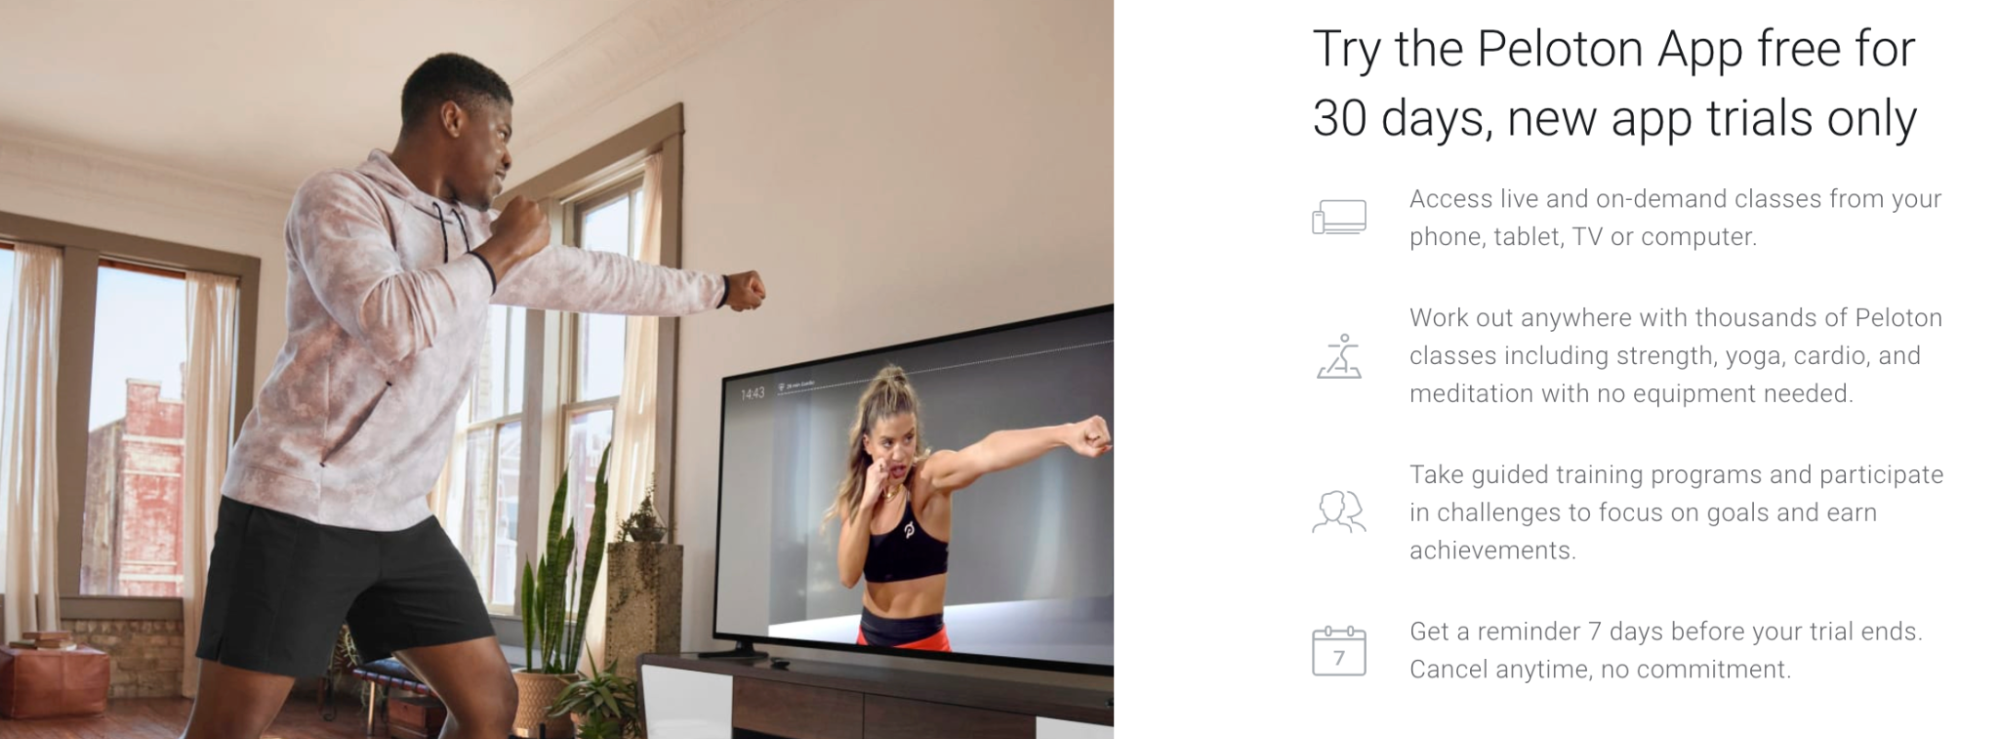 Man doing boxing exercise class at home in front of television screen